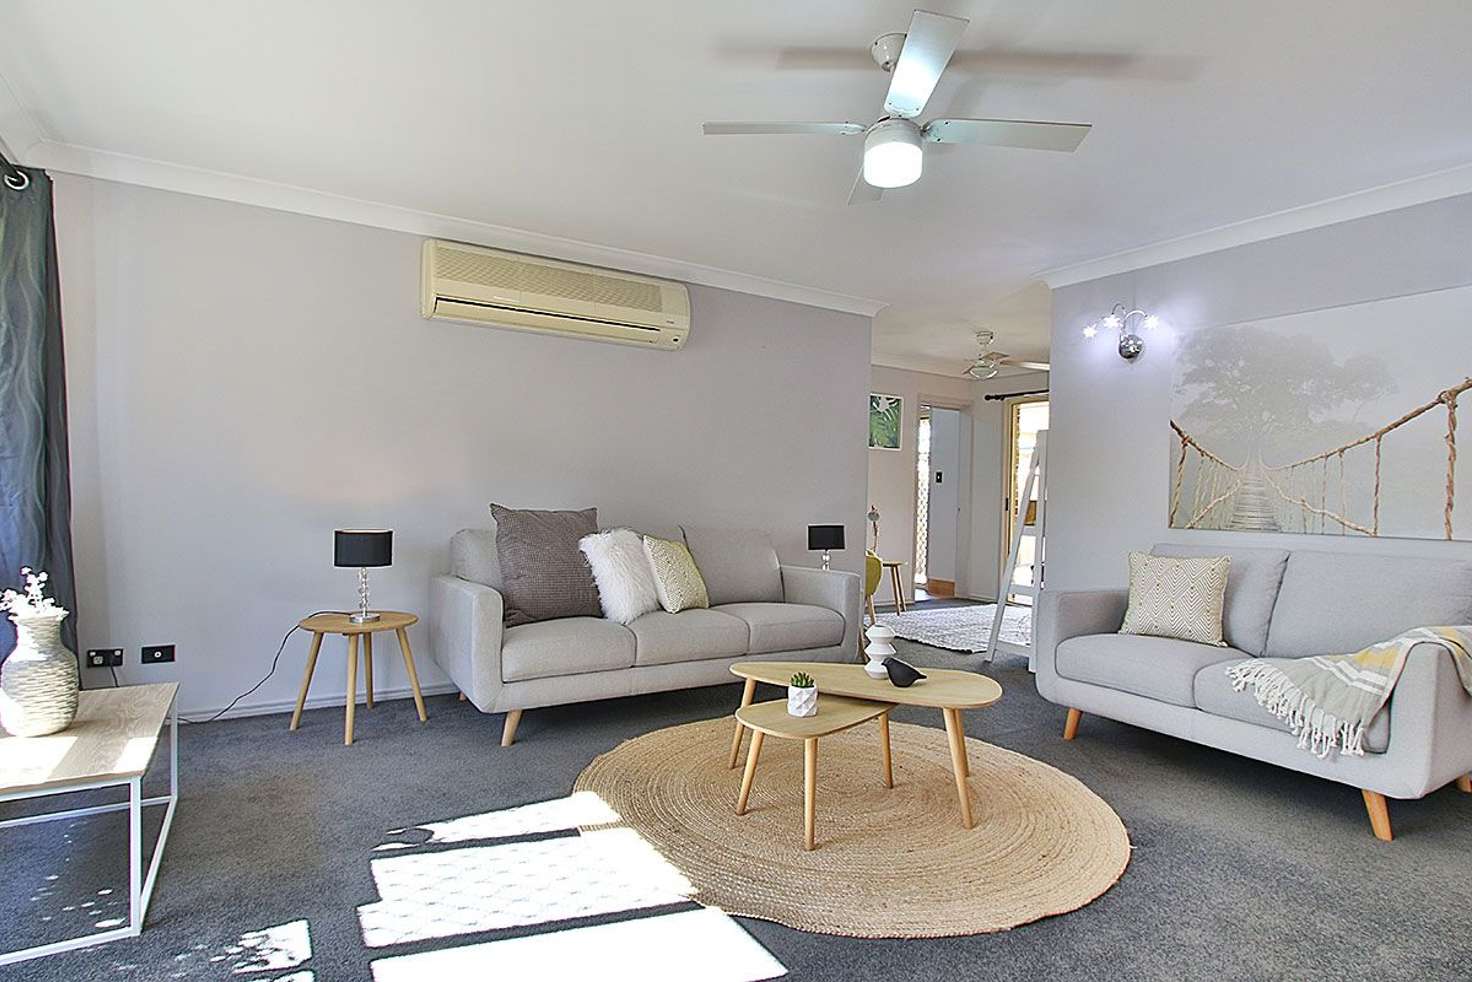 Main view of Homely house listing, 15 Dakota Place, Brassall QLD 4305